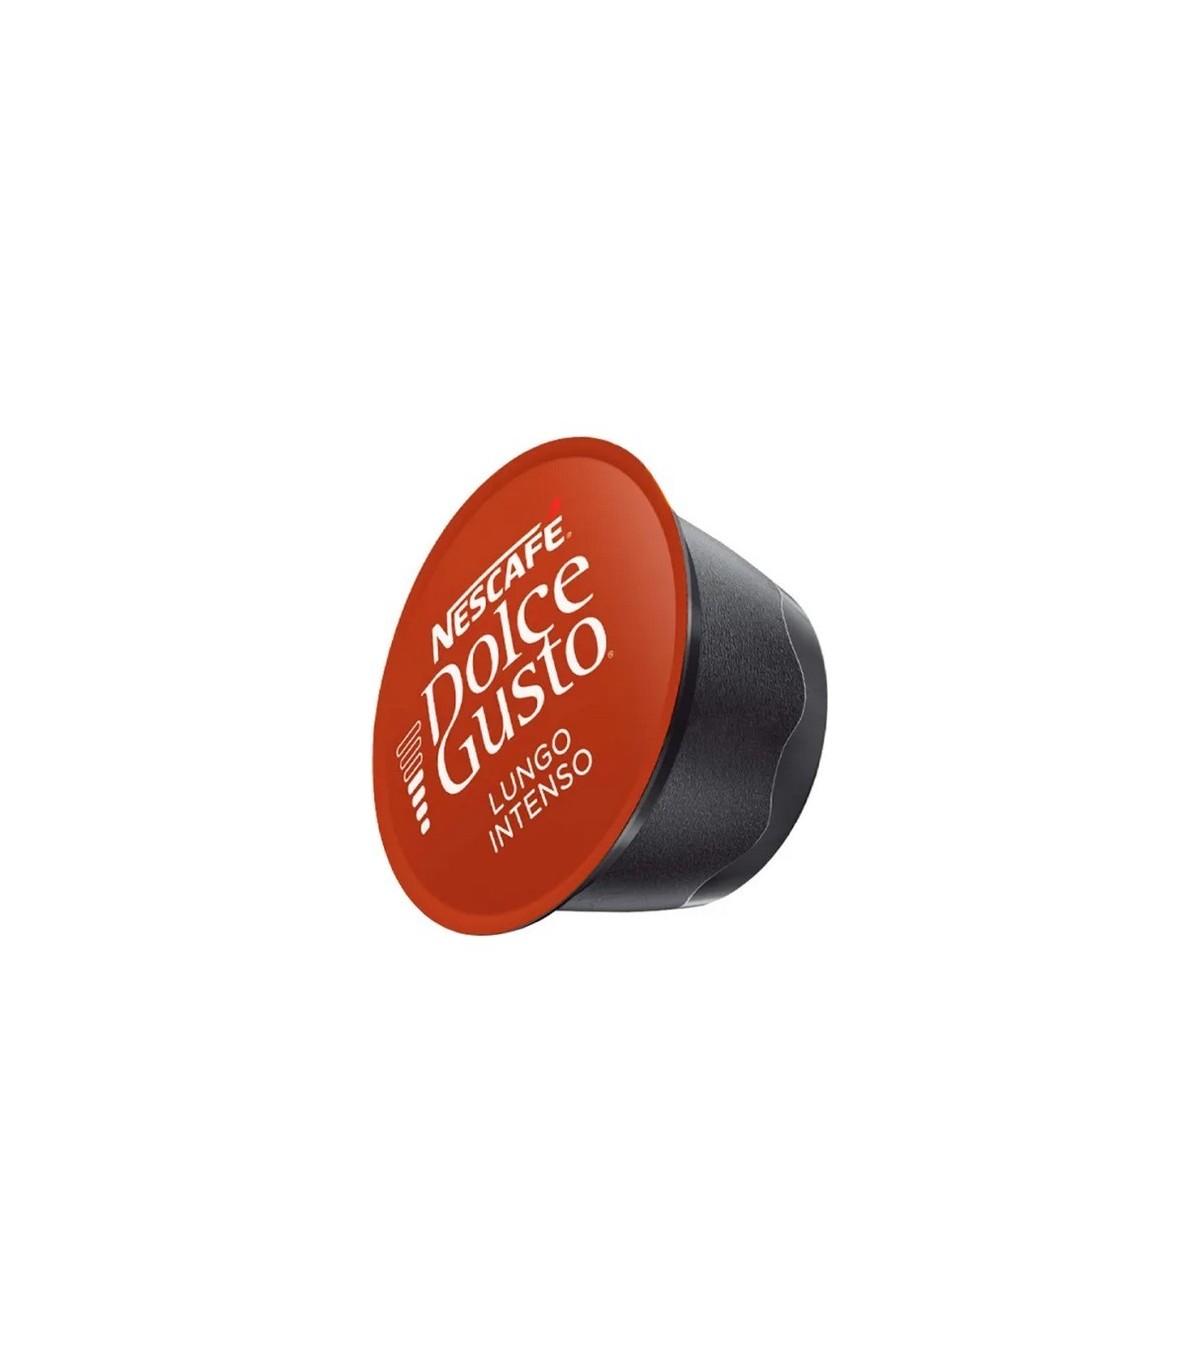 Nescafe Dolce Gusto Nesquik, 2 x 16 Capsules (32 Servings)